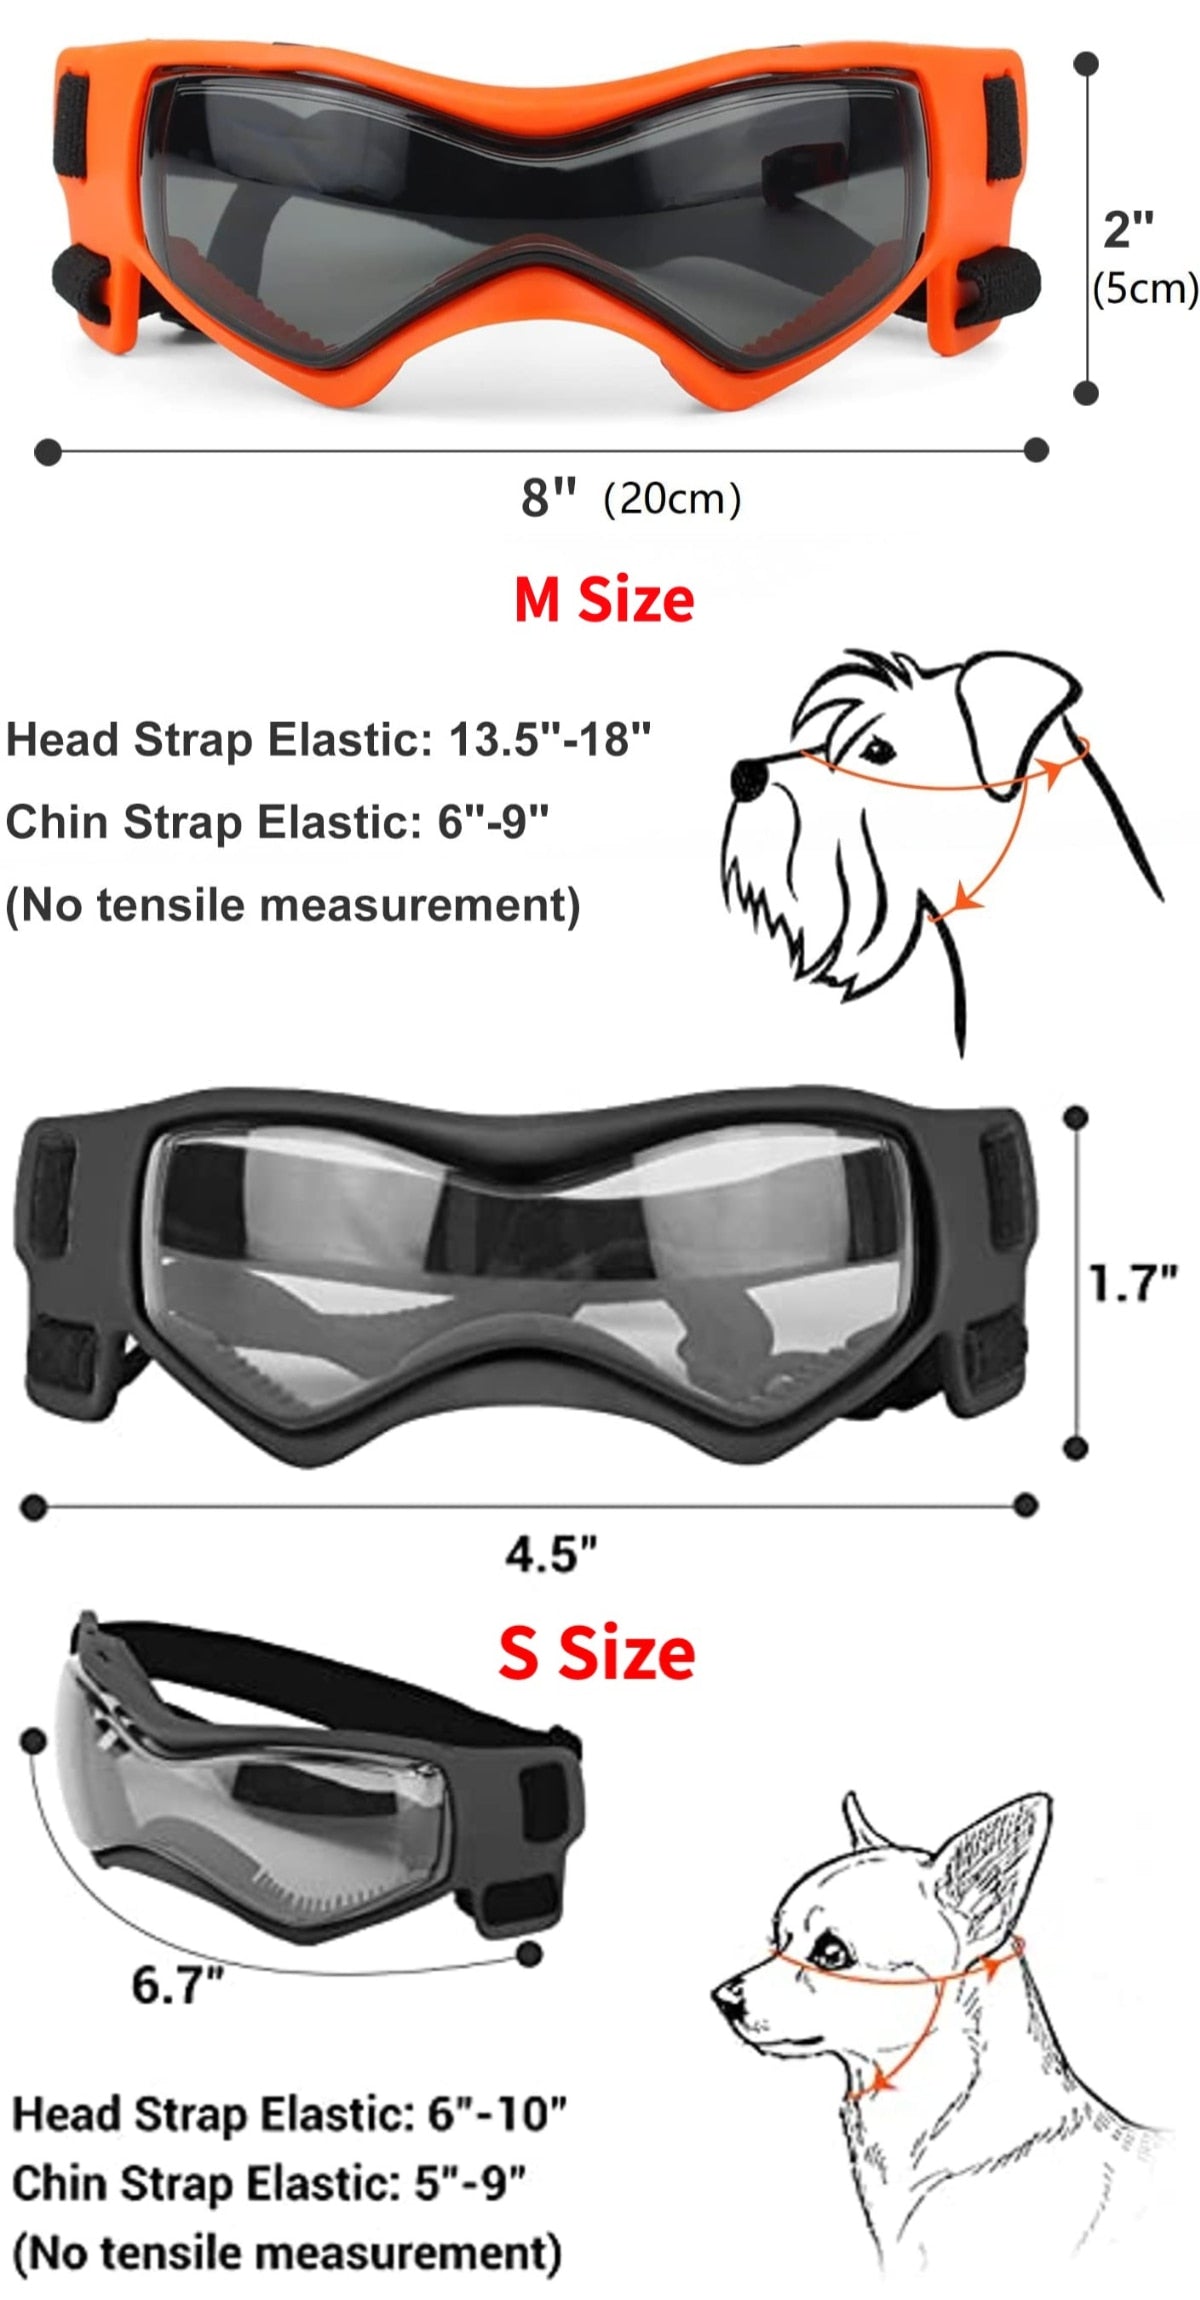 Dog Goggles Small Breed,Easy Wear Small Dog Sunglasses,Adjustable UV Protection Puppy Sunglasses for Small to Medium Dog